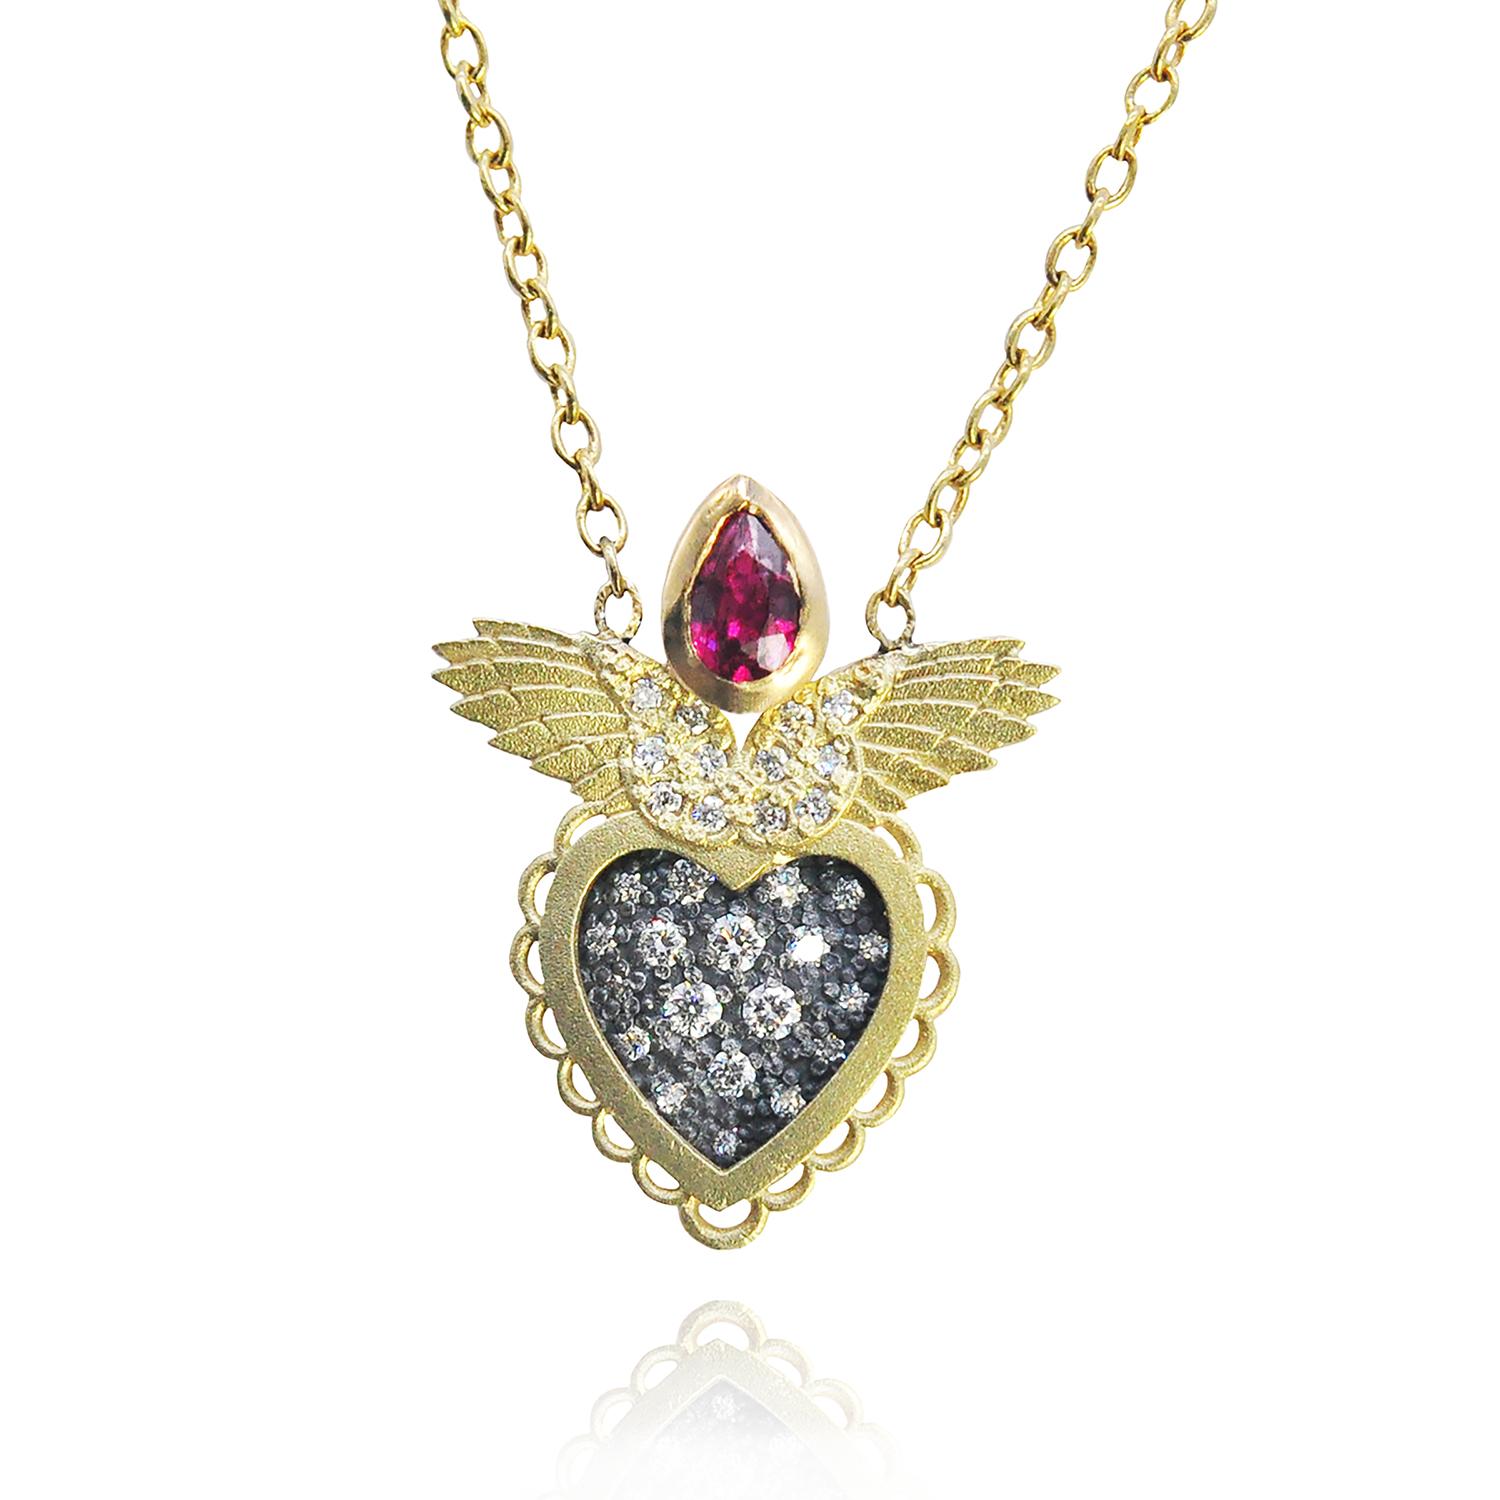 Oxidized silver center glimmers with pave set white diamonds inside a bright 18k yellow gold scalloped valentine style heart. Our signature 18k yellow gold wings are topped with a juicy red, faceted, pear shaped ruby and more pave set white